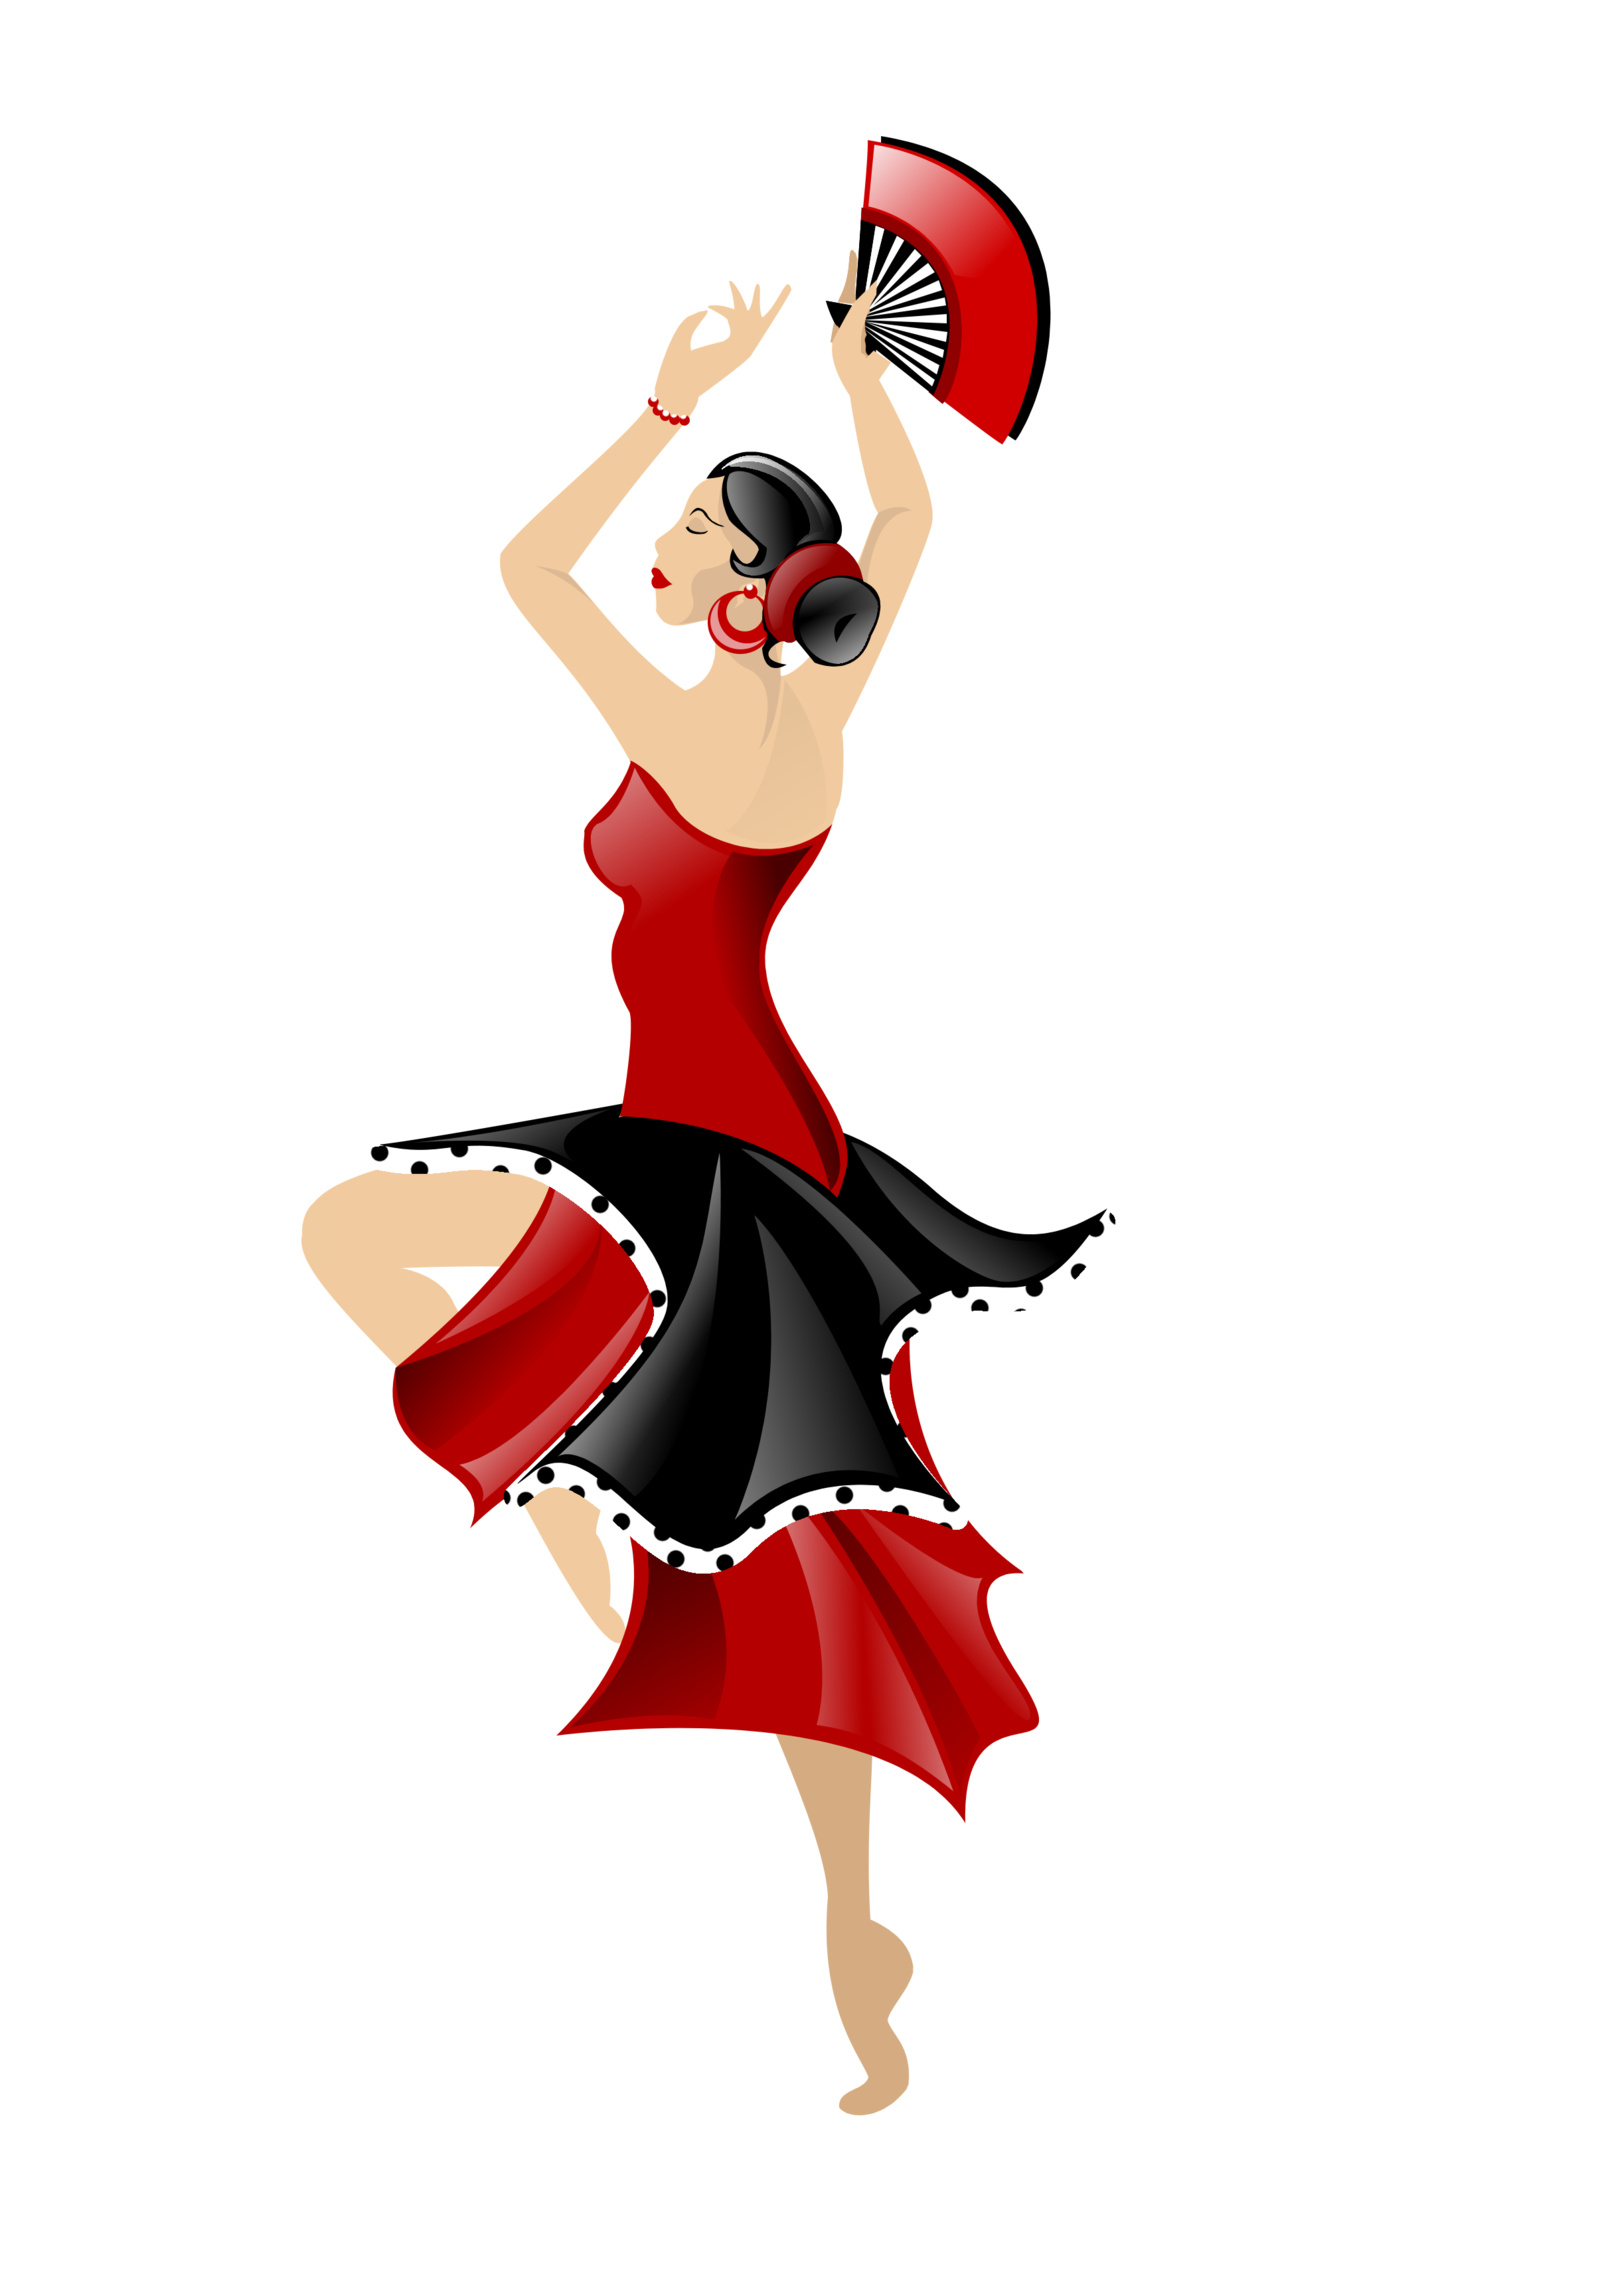 Flamenco: Expressive dance performed with a fan, Body moves, Emotions of the dancer. 1600x2290 HD Wallpaper.